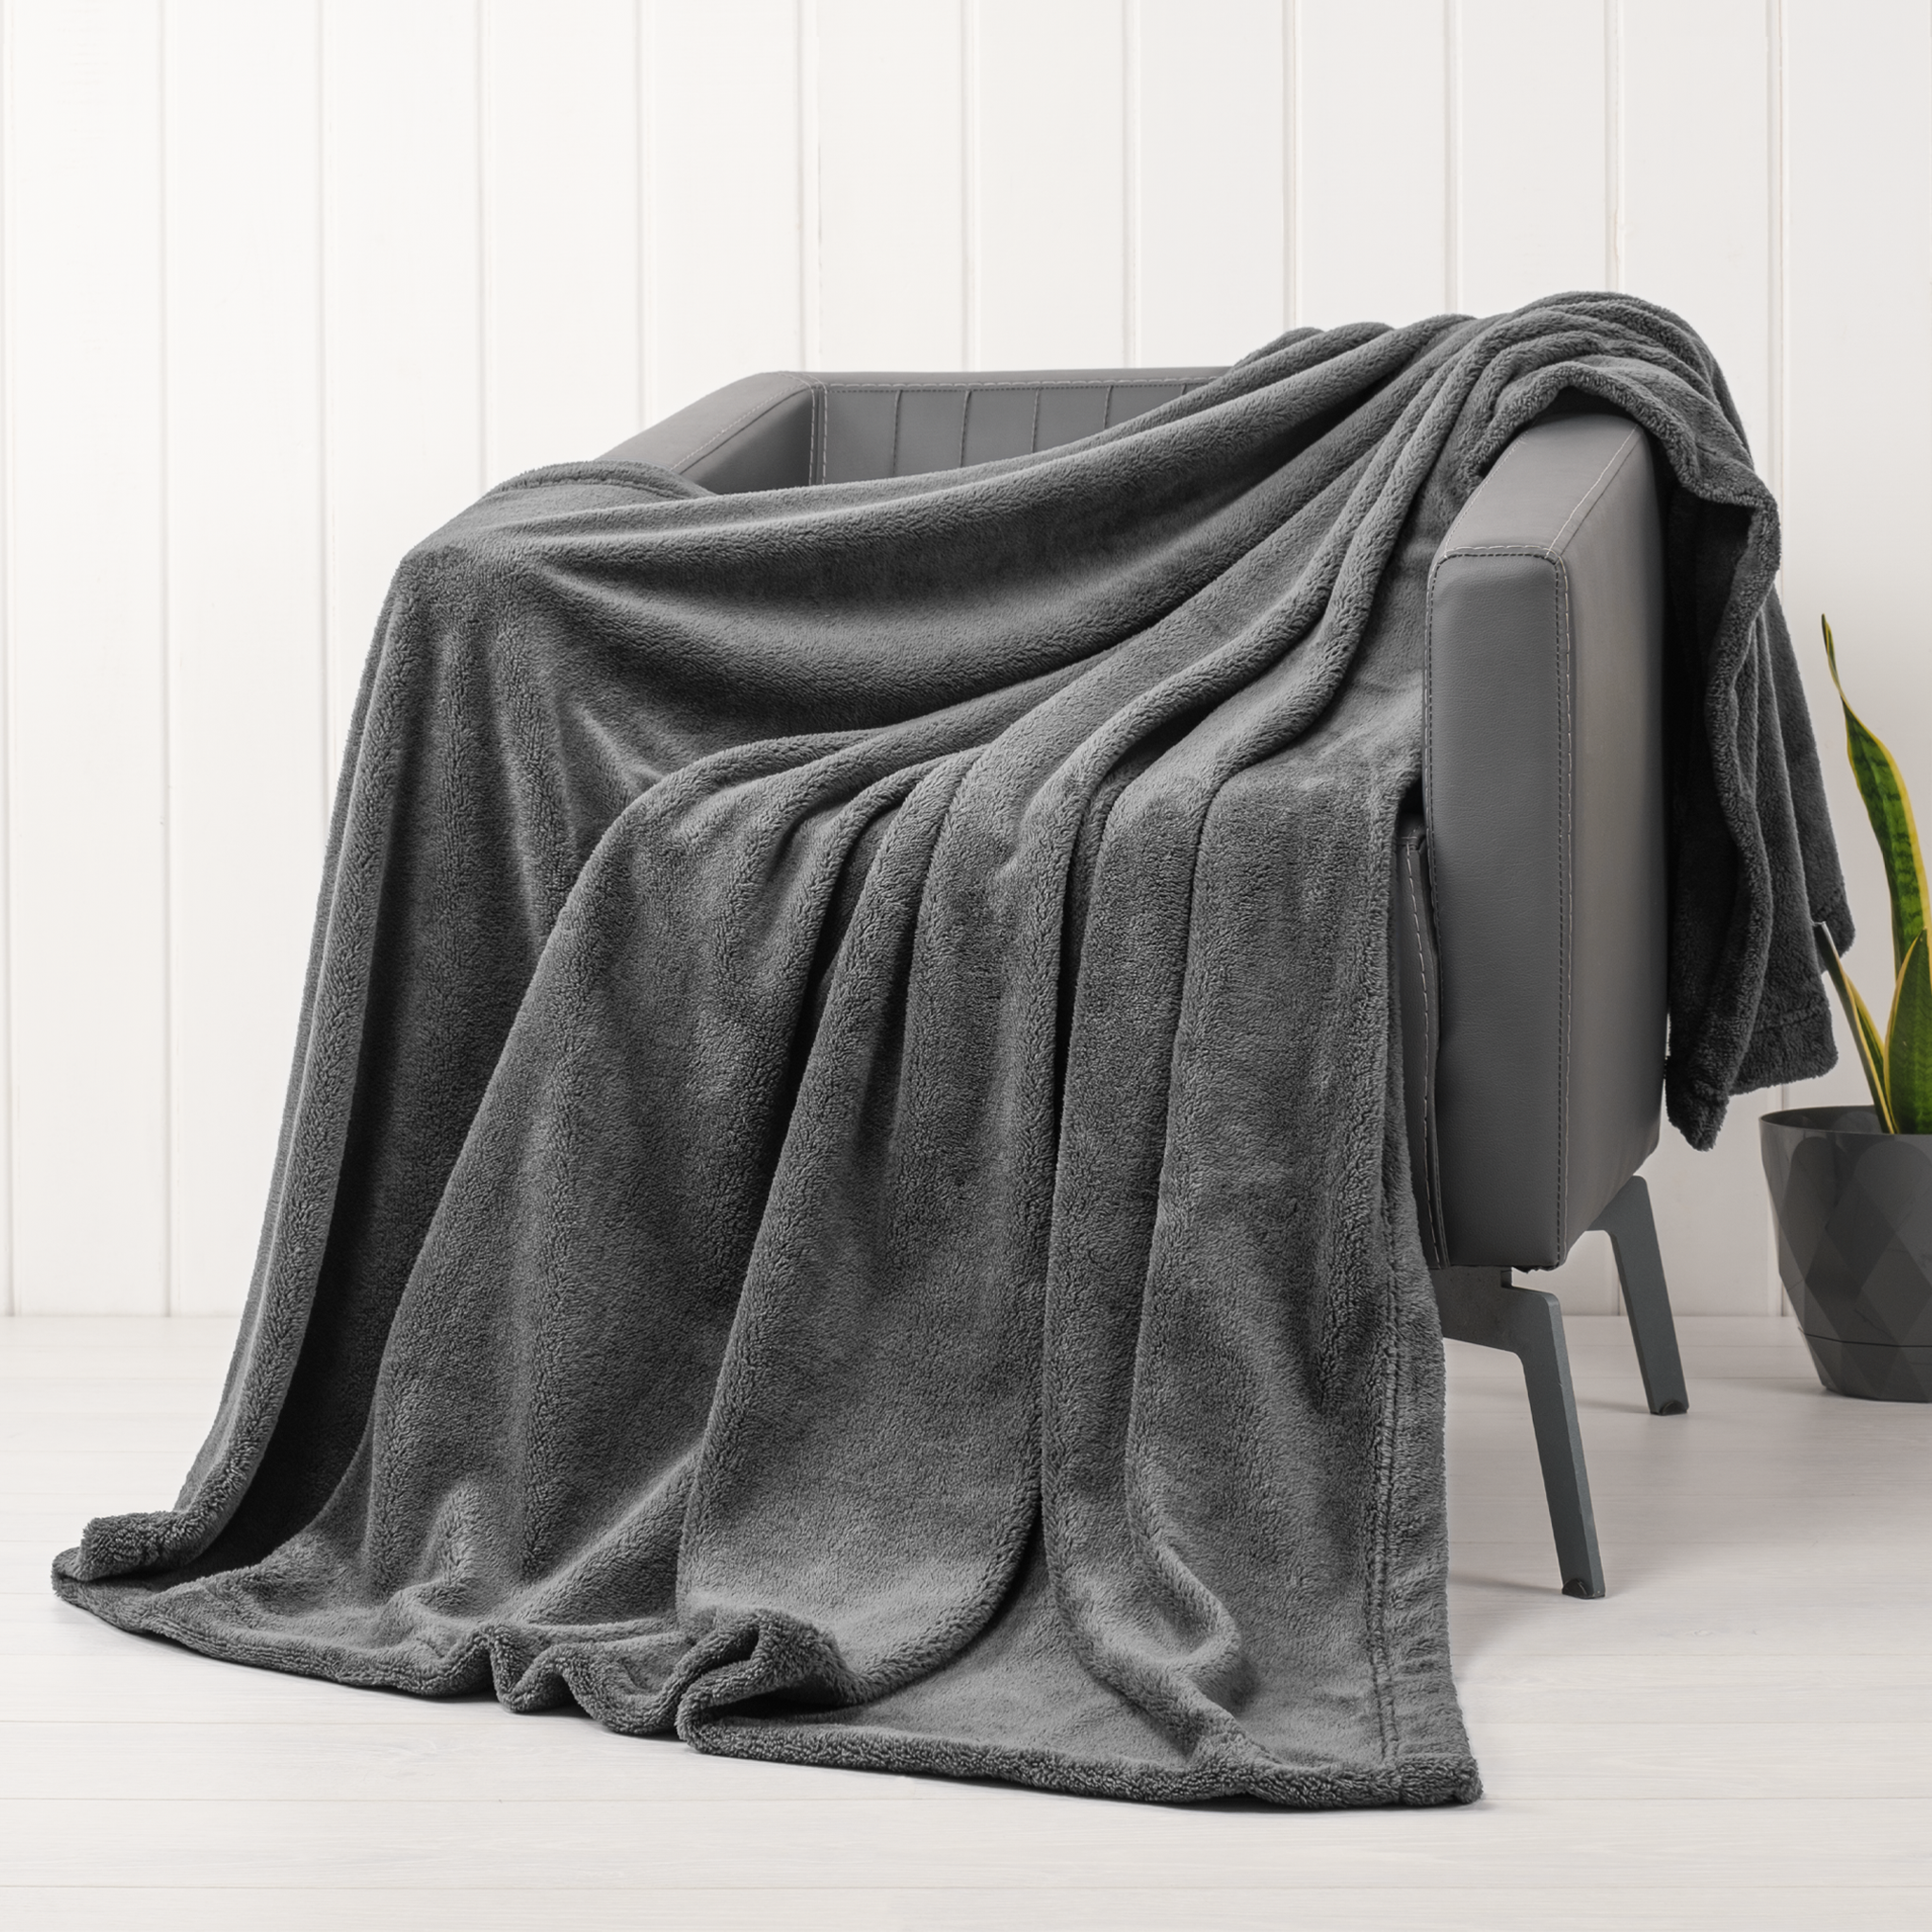 American Soft Linen - Bedding Fleece Blanket - Wholesale - 15 Set Case Pack - Twin Size 60x80 inches - Gray - 1